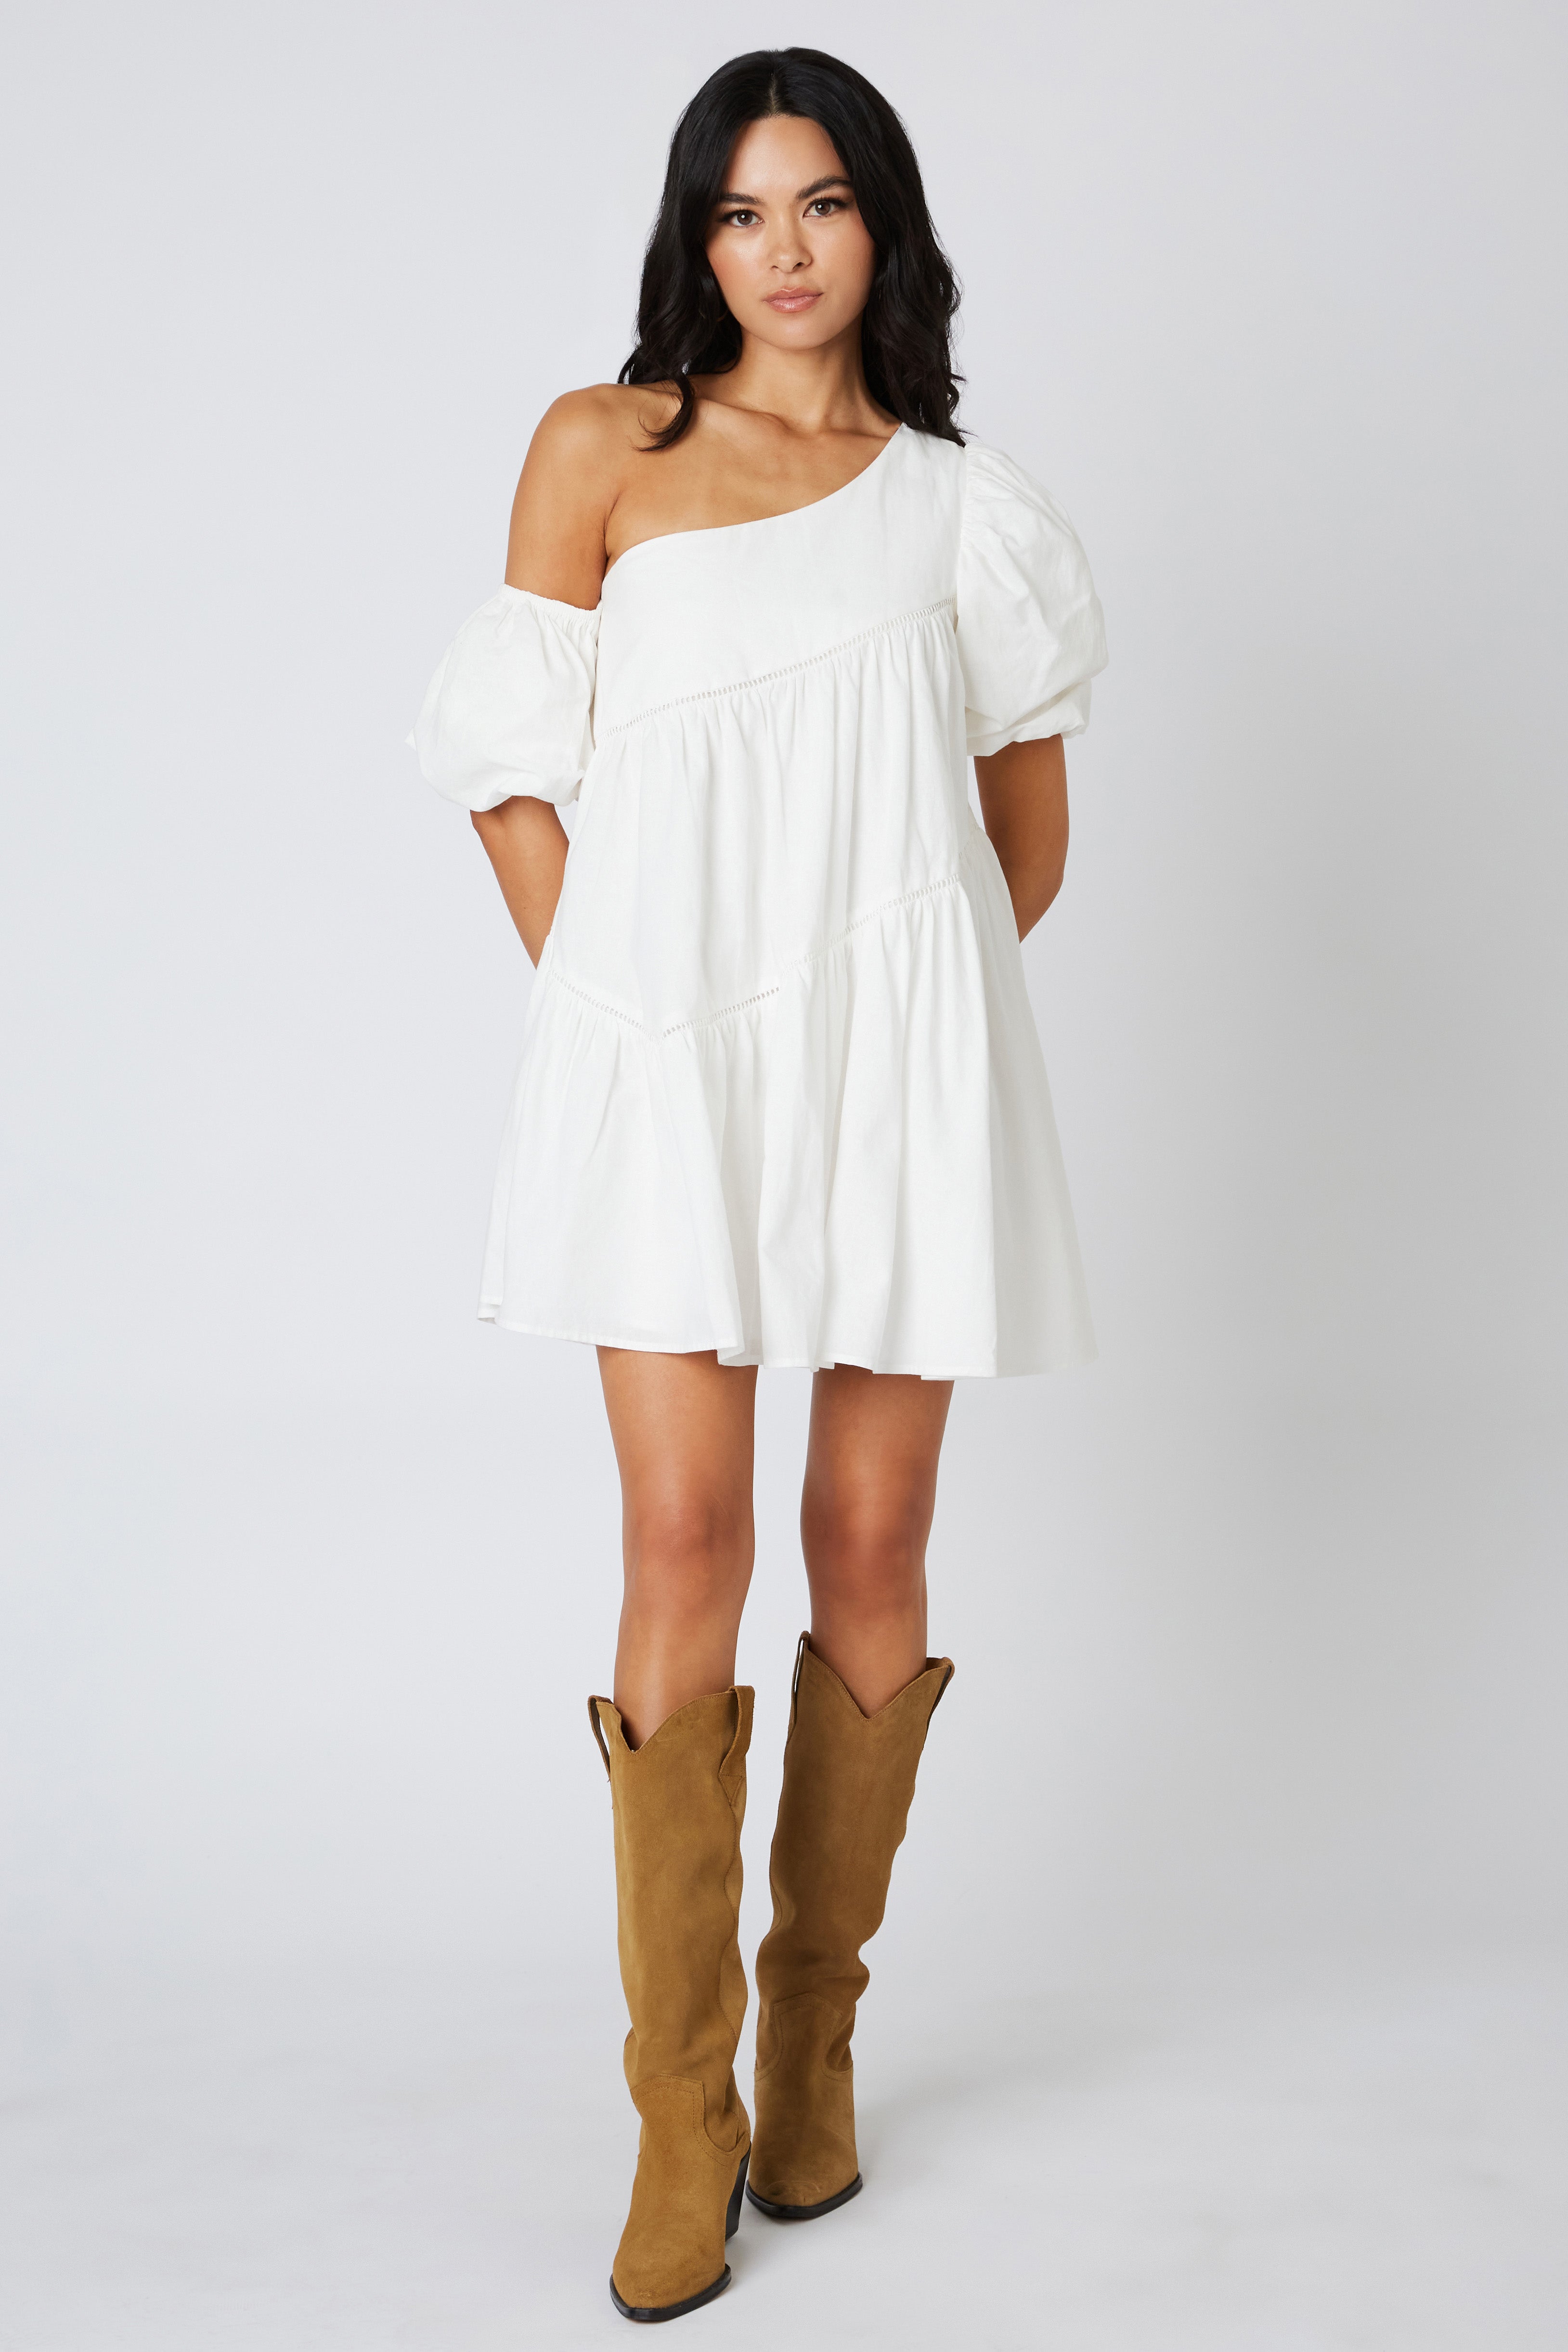 Cold Shoulder Trapeze Dress in White Front View